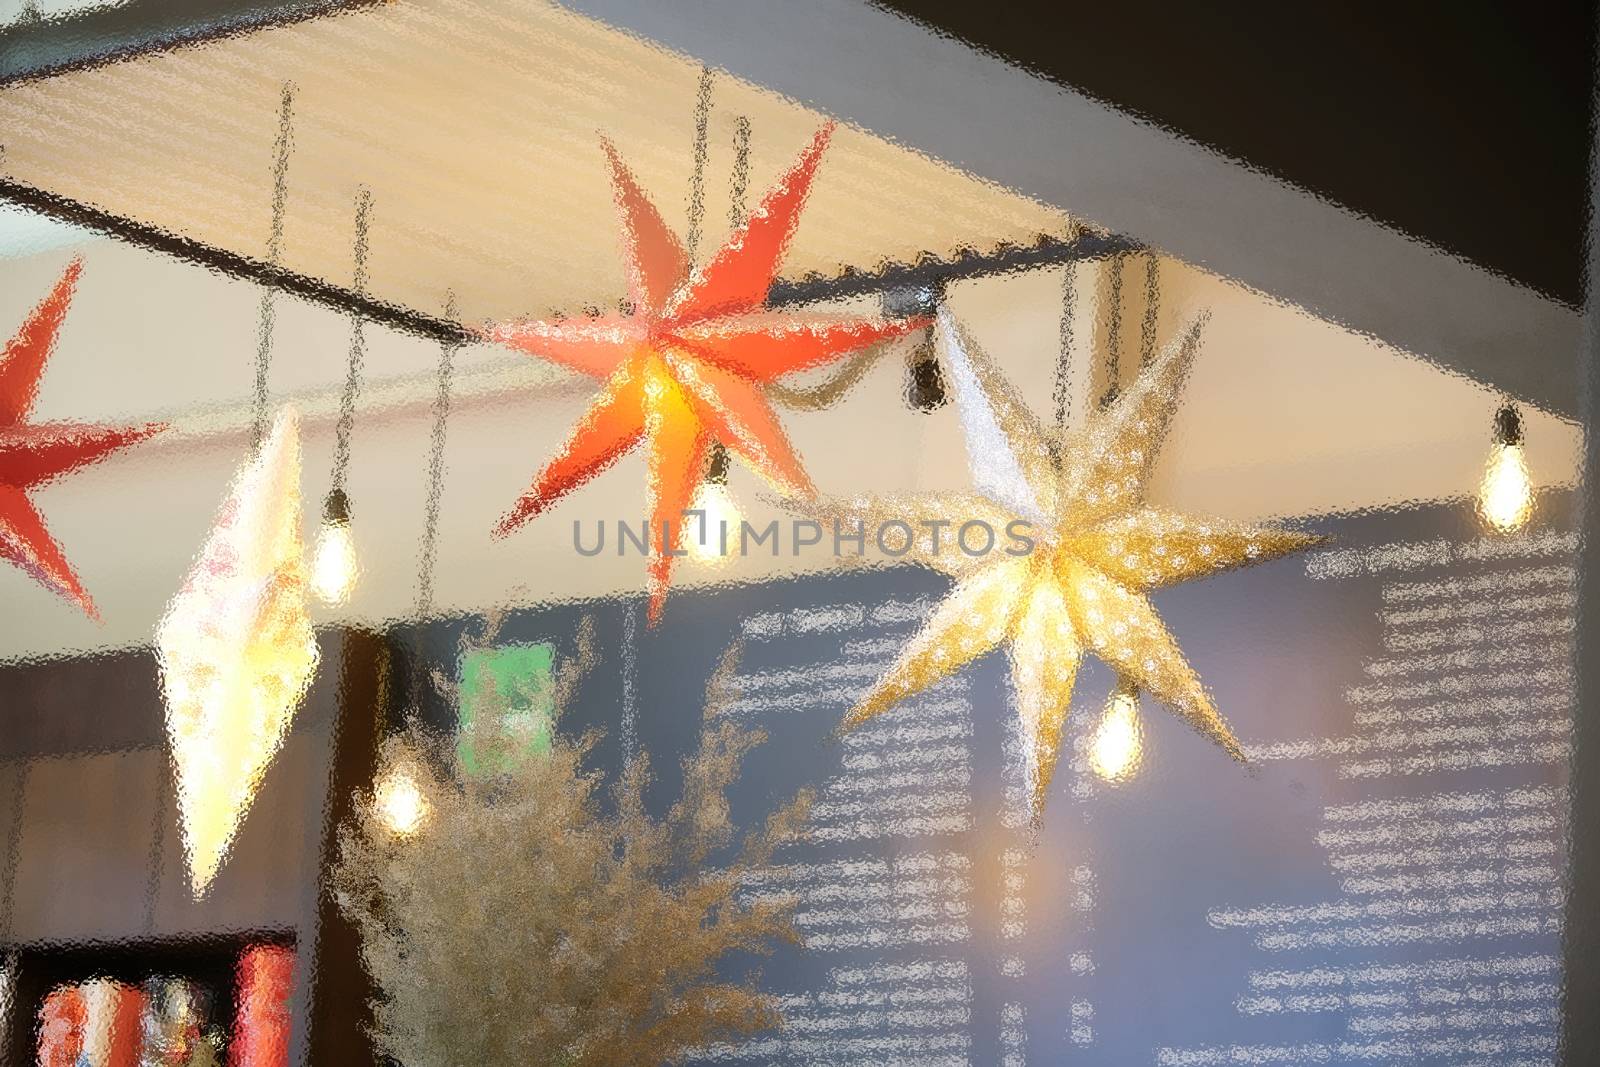 The Christmas star through frosted glass image for background use